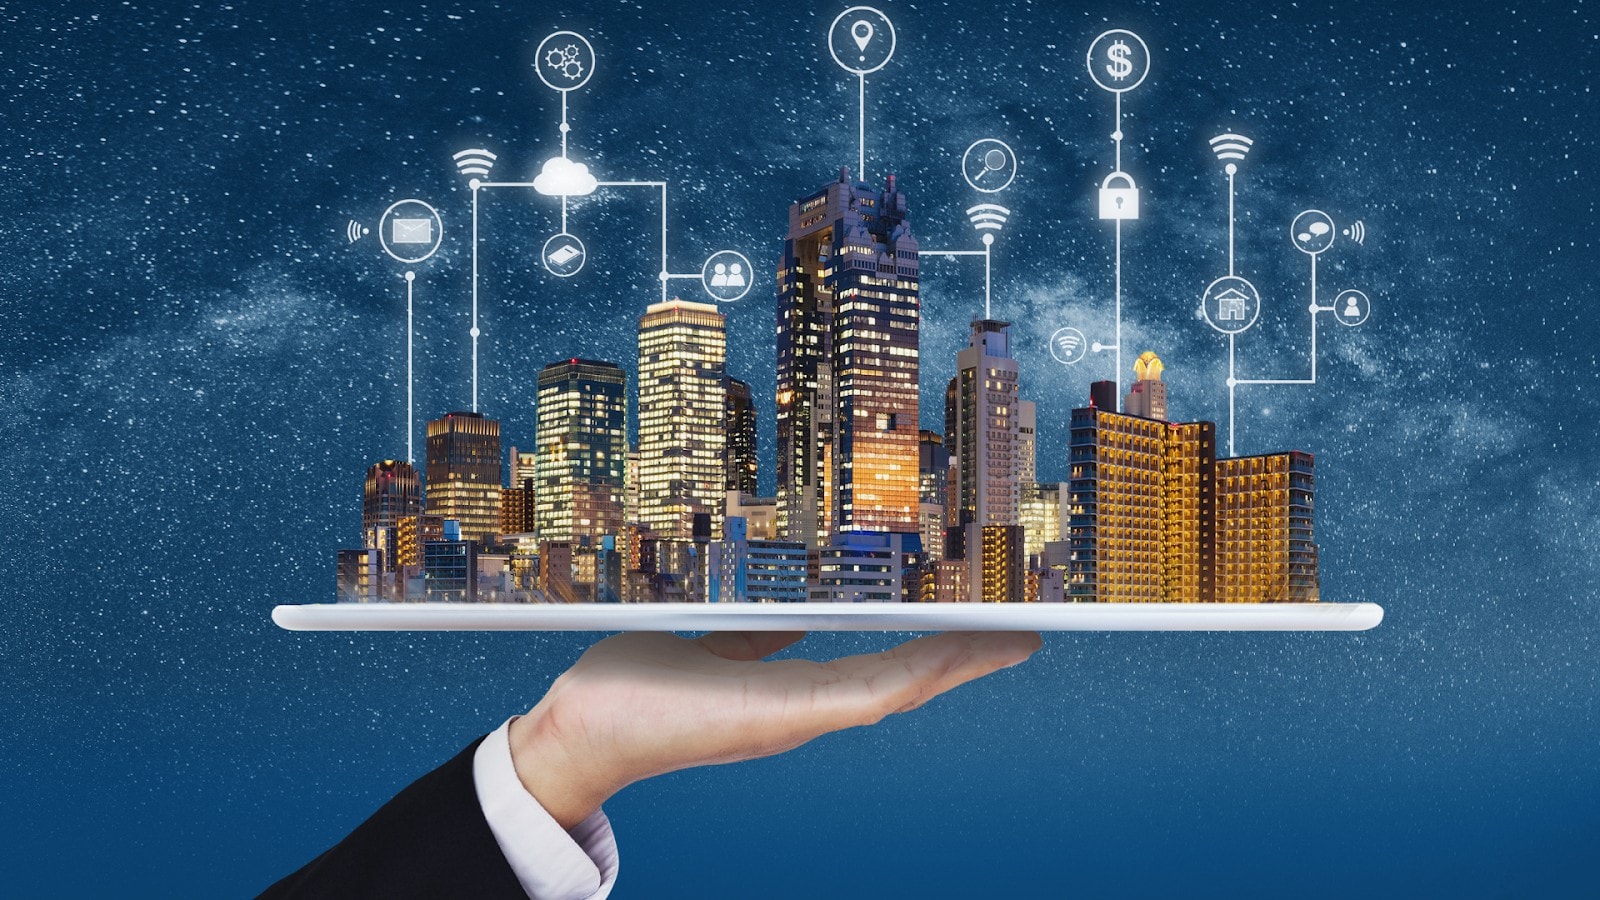 A hand holding up a smart city on a silver platter